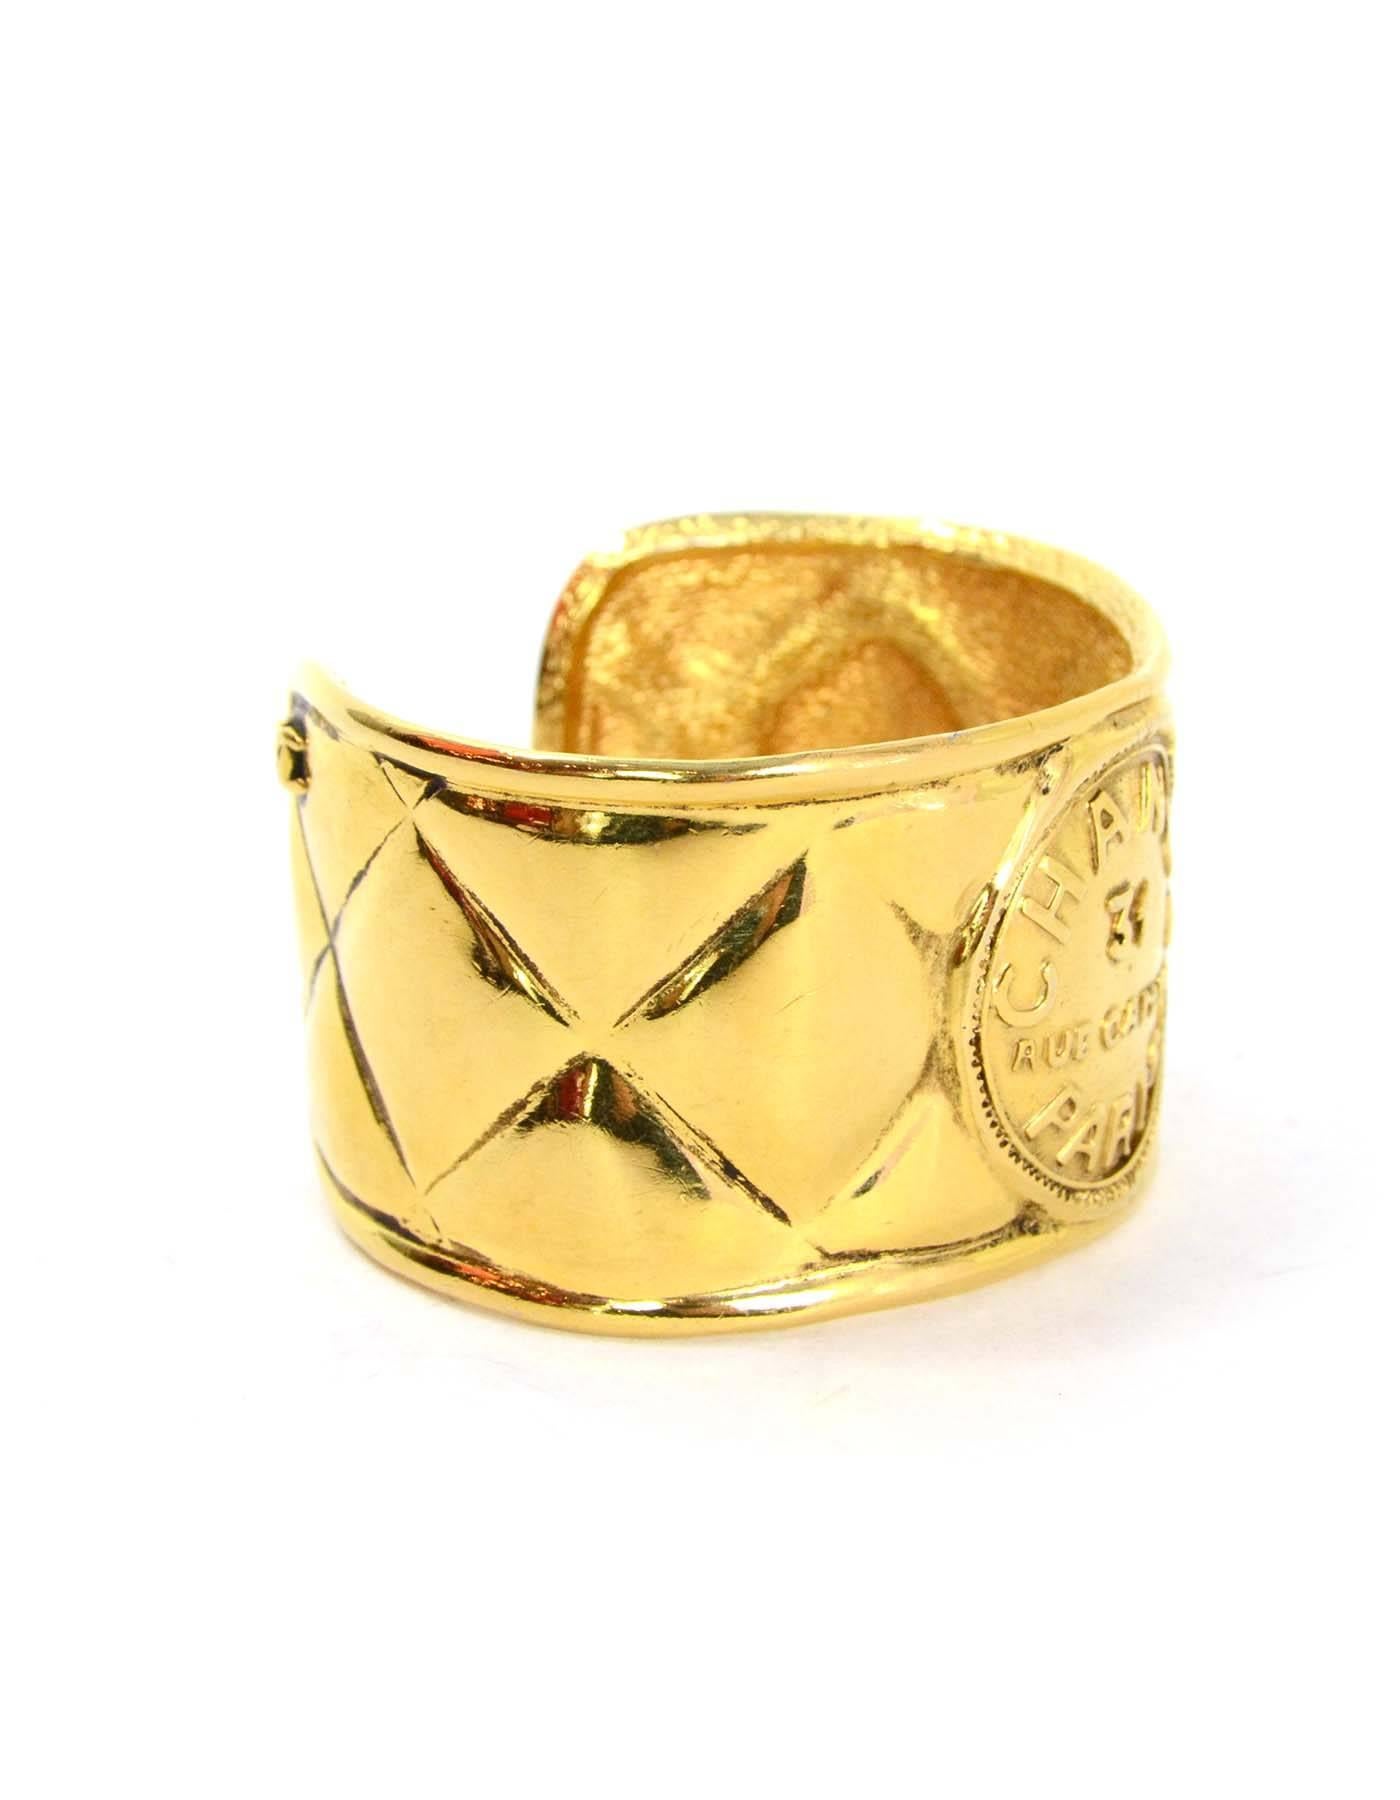 Chanel Vintage 70's Quilted Gold Cuff
Features coin engraved with Chanel text on it
Made In: France
Year of Production: 1970's
Color: Goldtone
Materials: Metal
Closure: None
Stamp: Chanel CC Made in France
Overall Condition: Very good